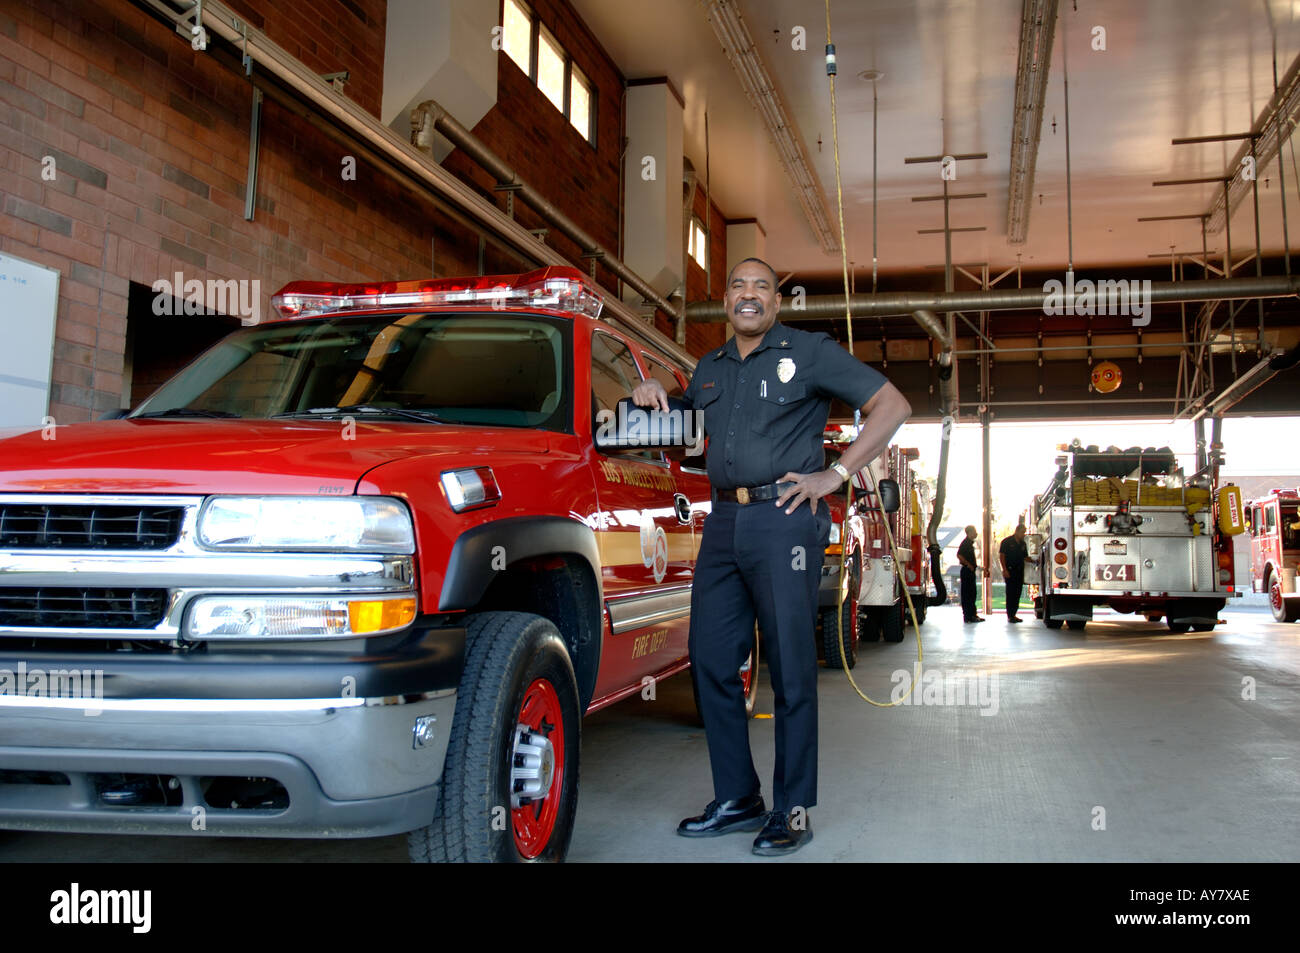 Chief Battalion firefighter standing next to pickup truck Stock Photo